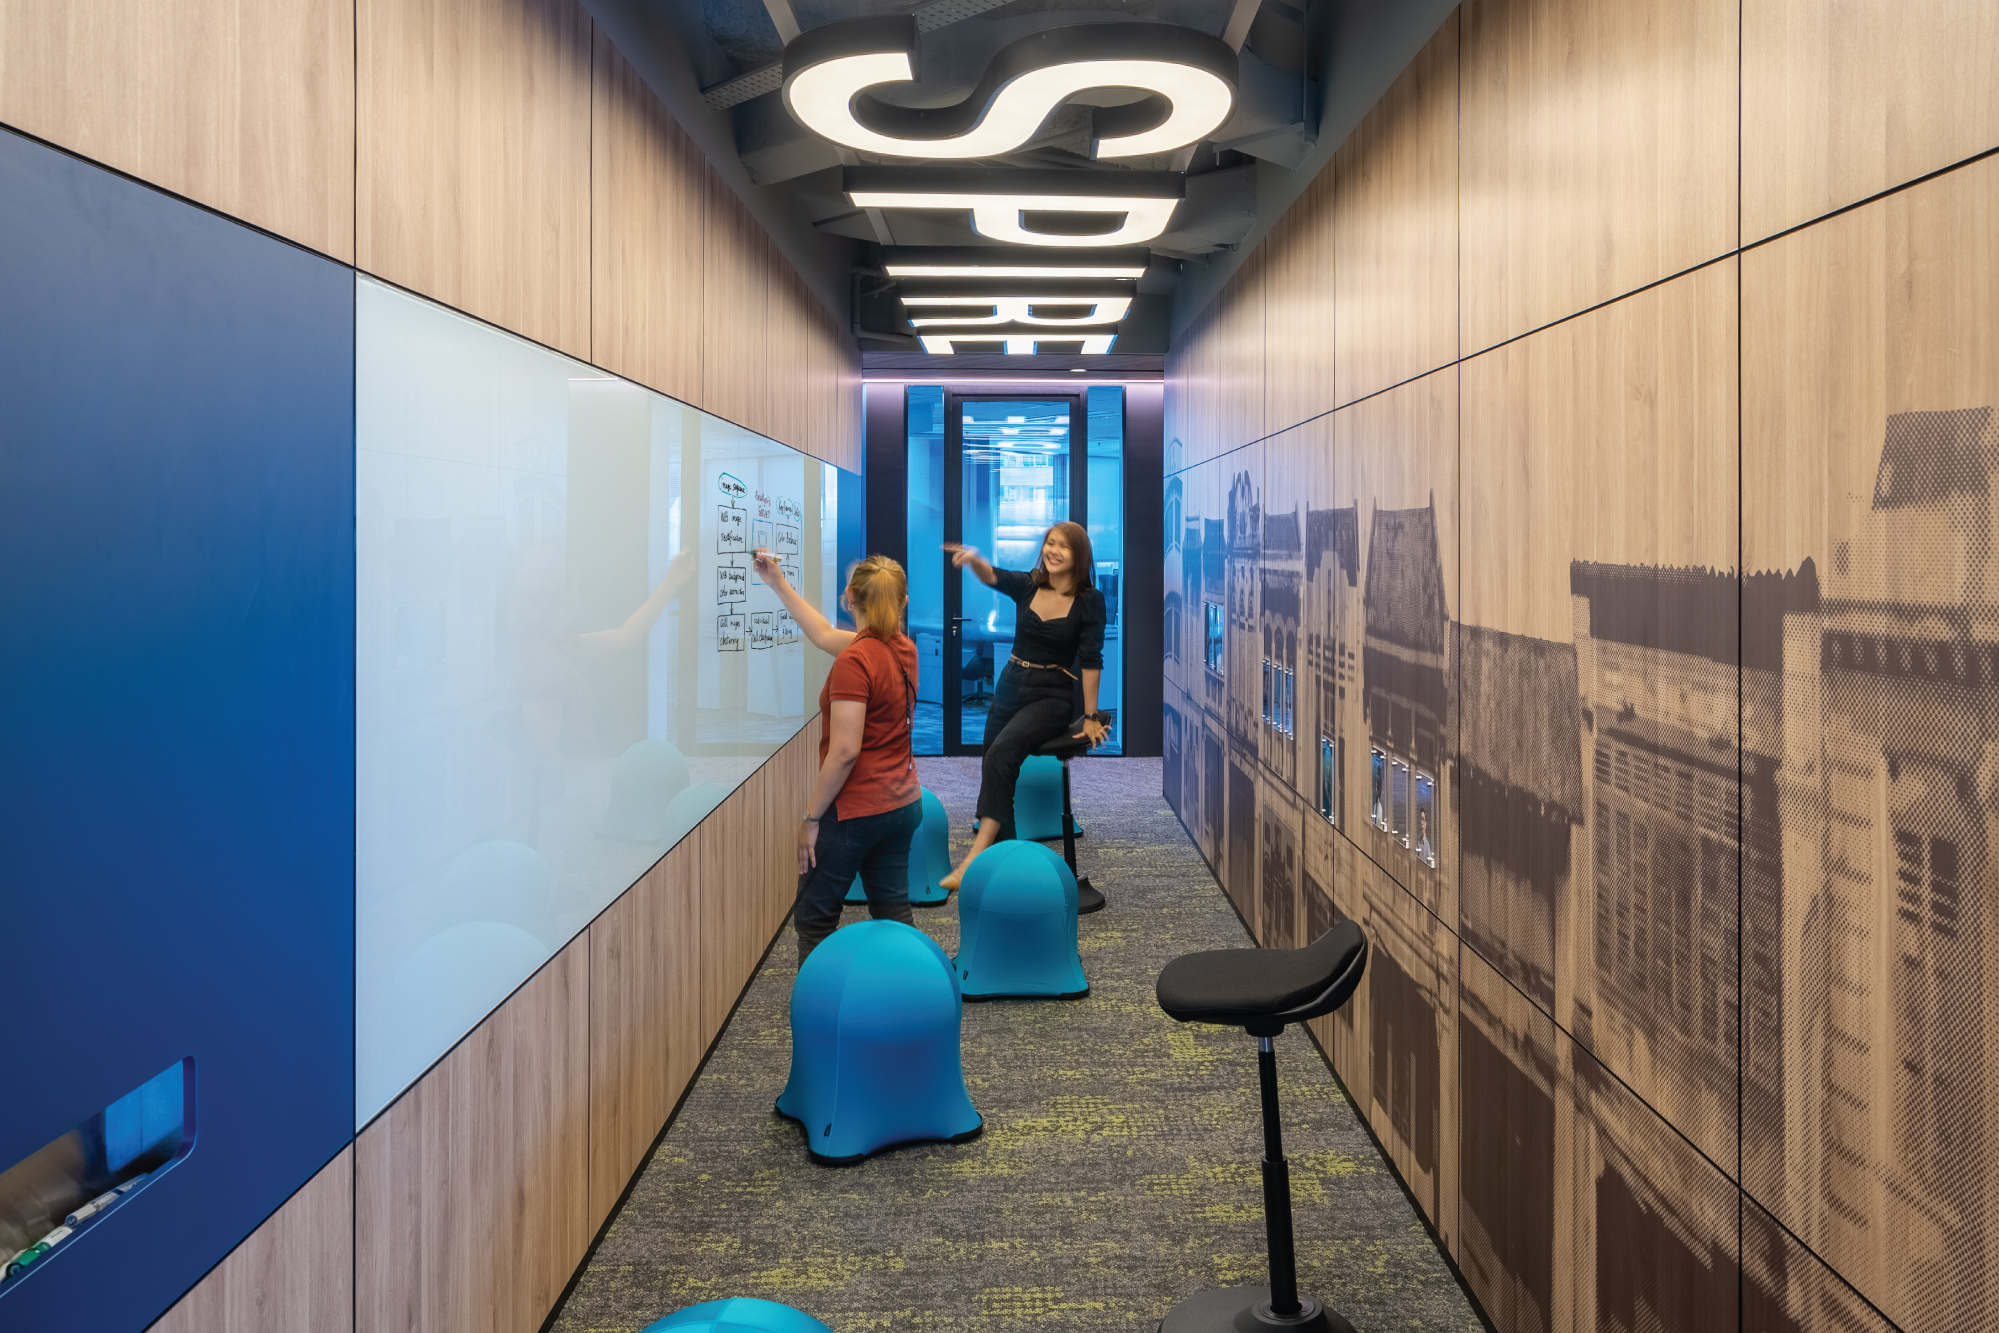 effective office design that reflects the business's ideas and values